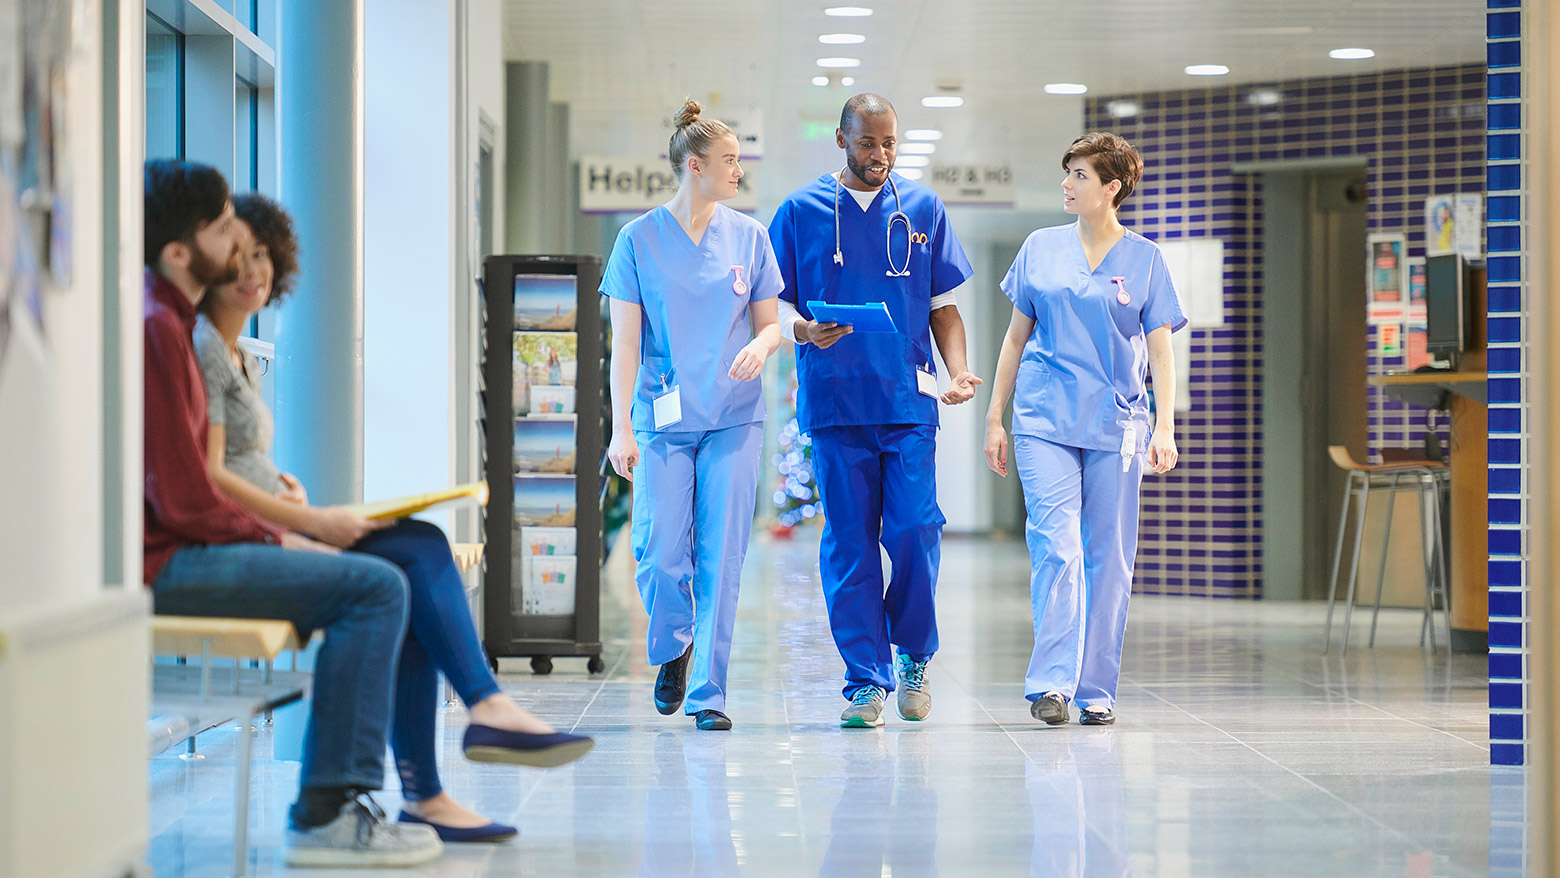 A trio of doctors discuss while walking down a hospital hallway